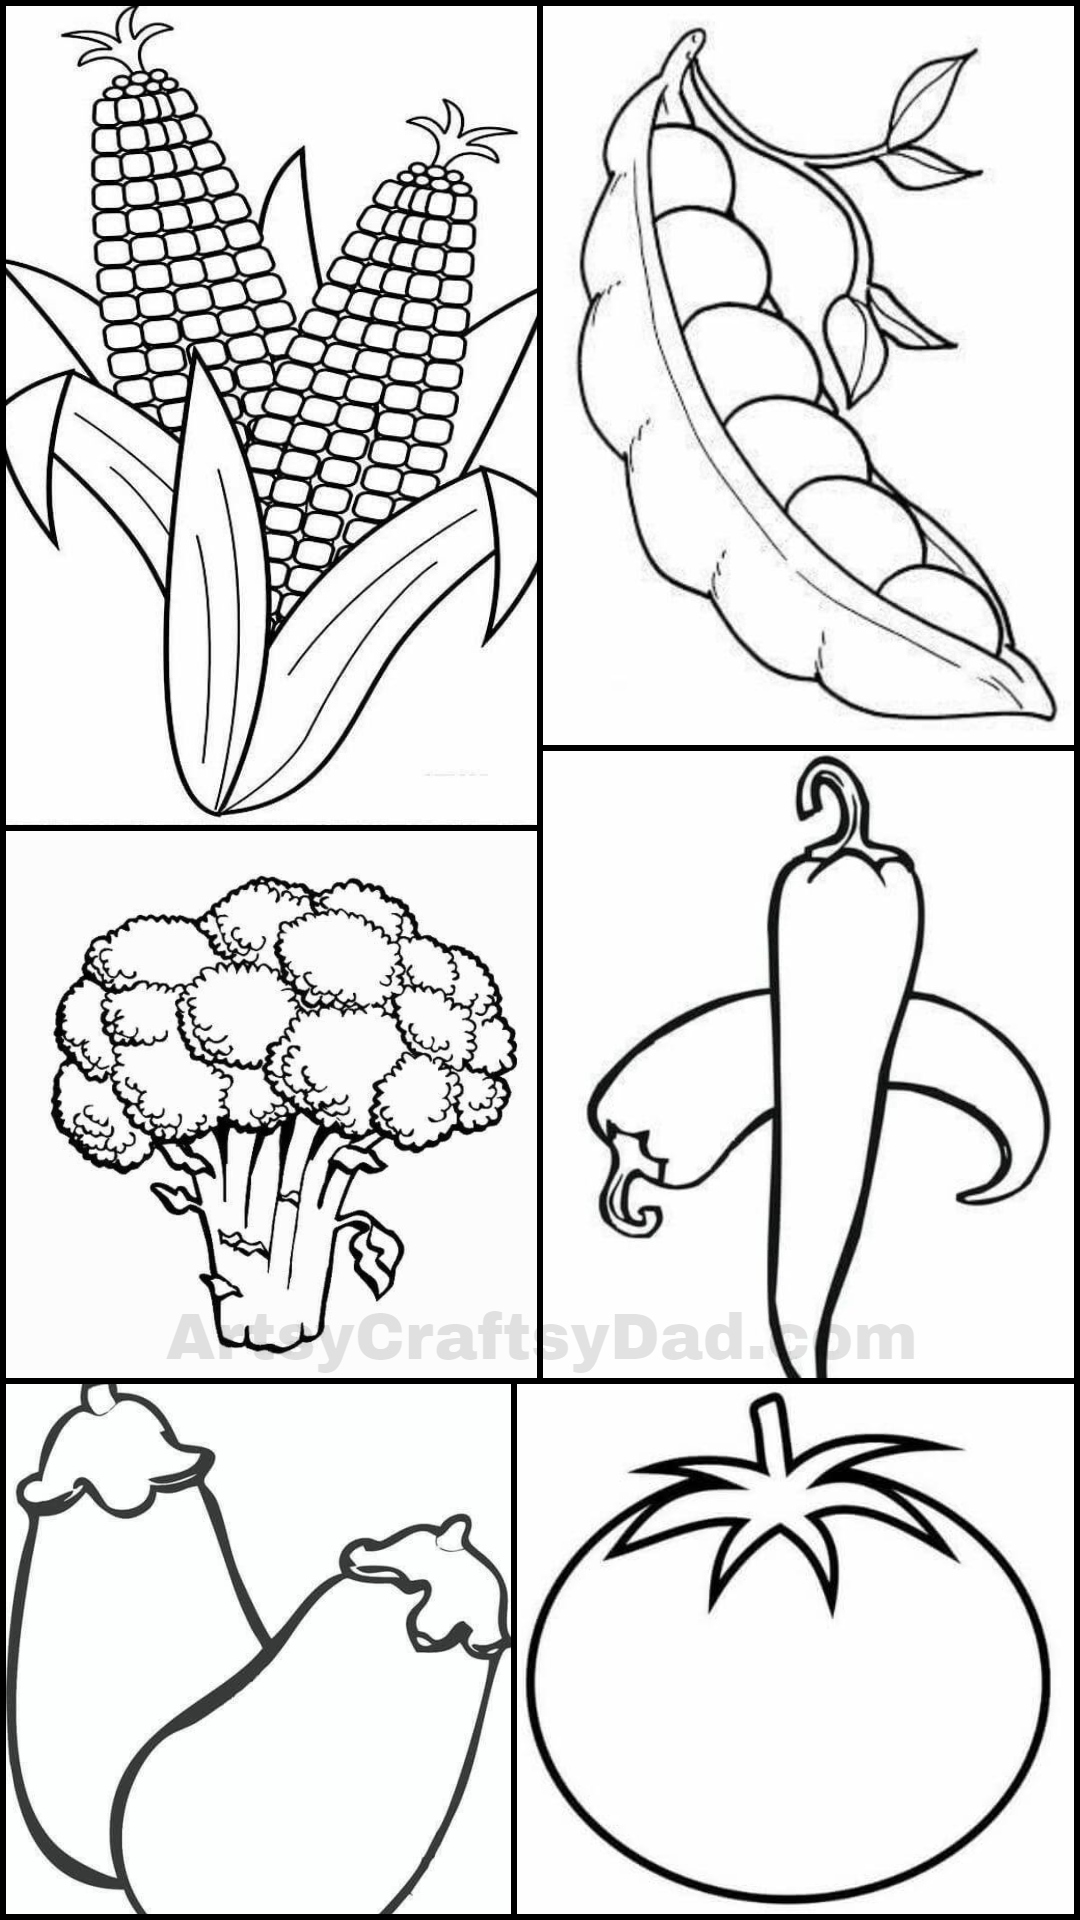 Vegetable Coloring Pages for Kids